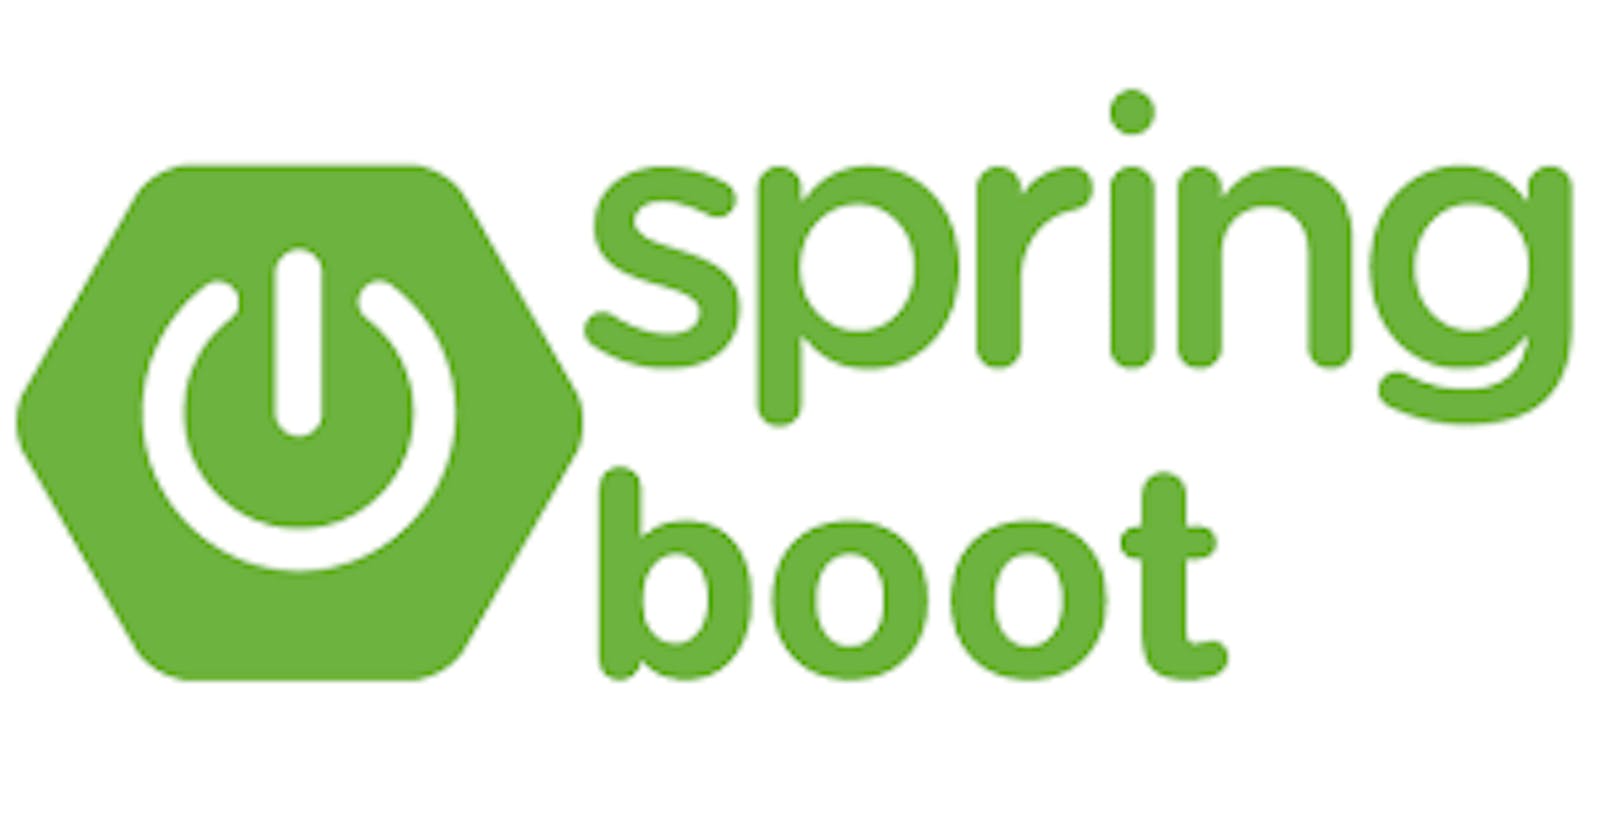 How to create Java Project with Maven and convert it to Spring Boot Project